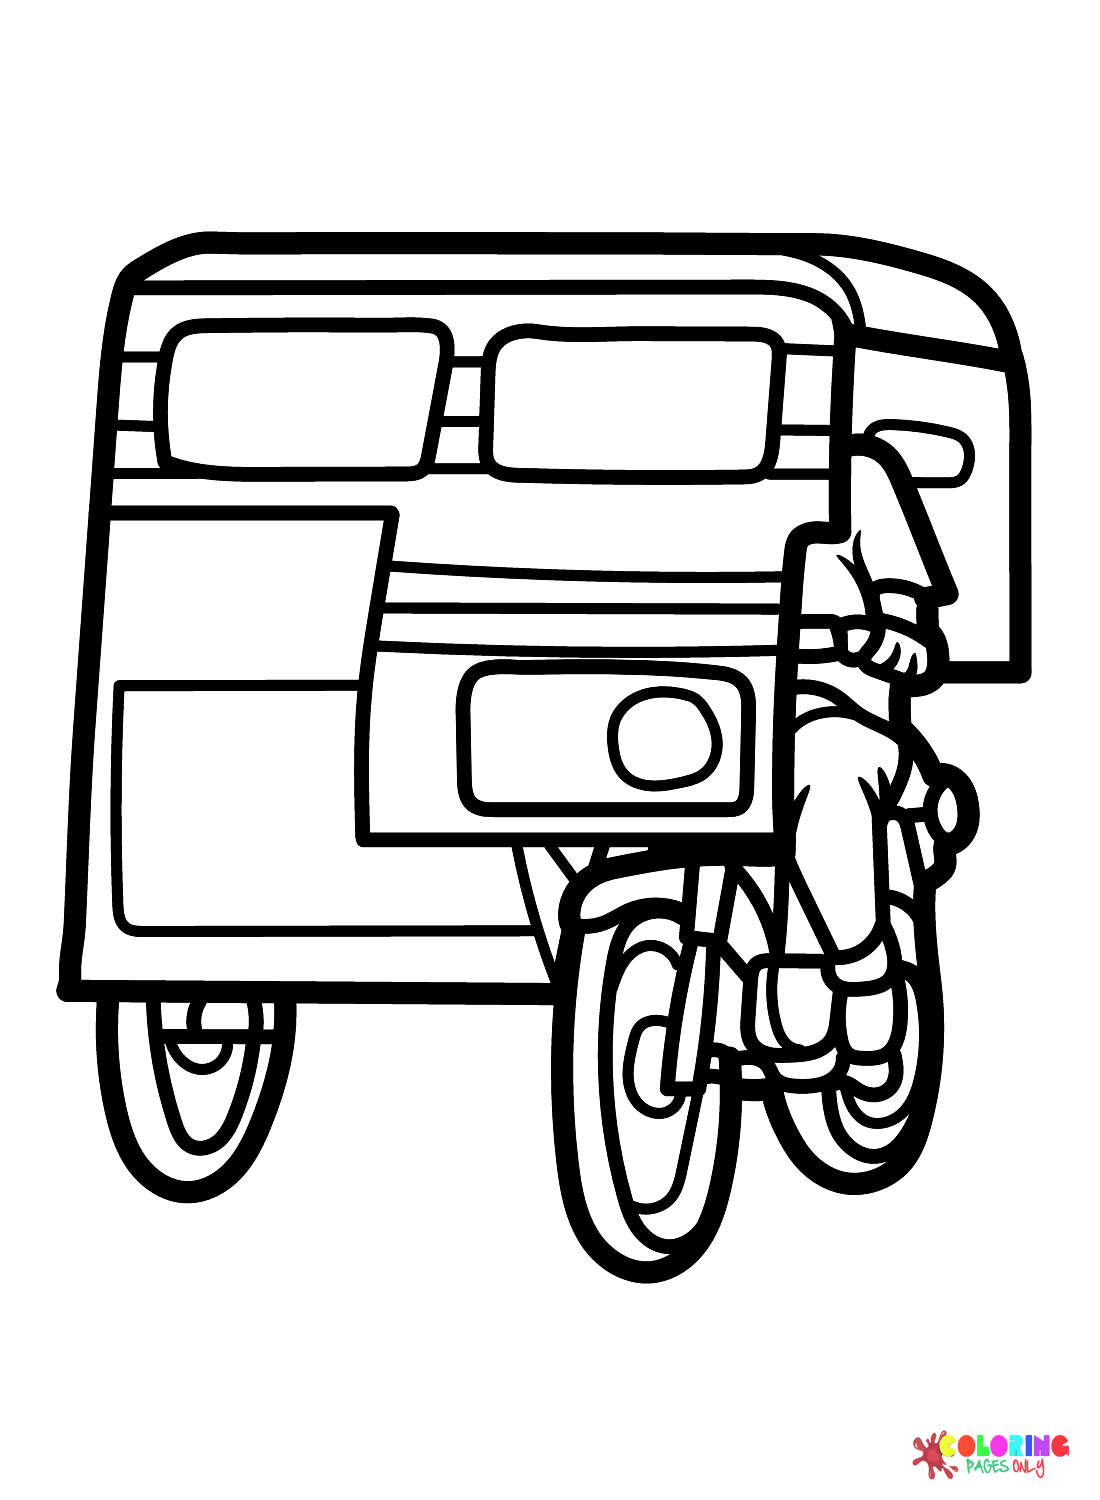 Tricycle Taxi Coloring Pages